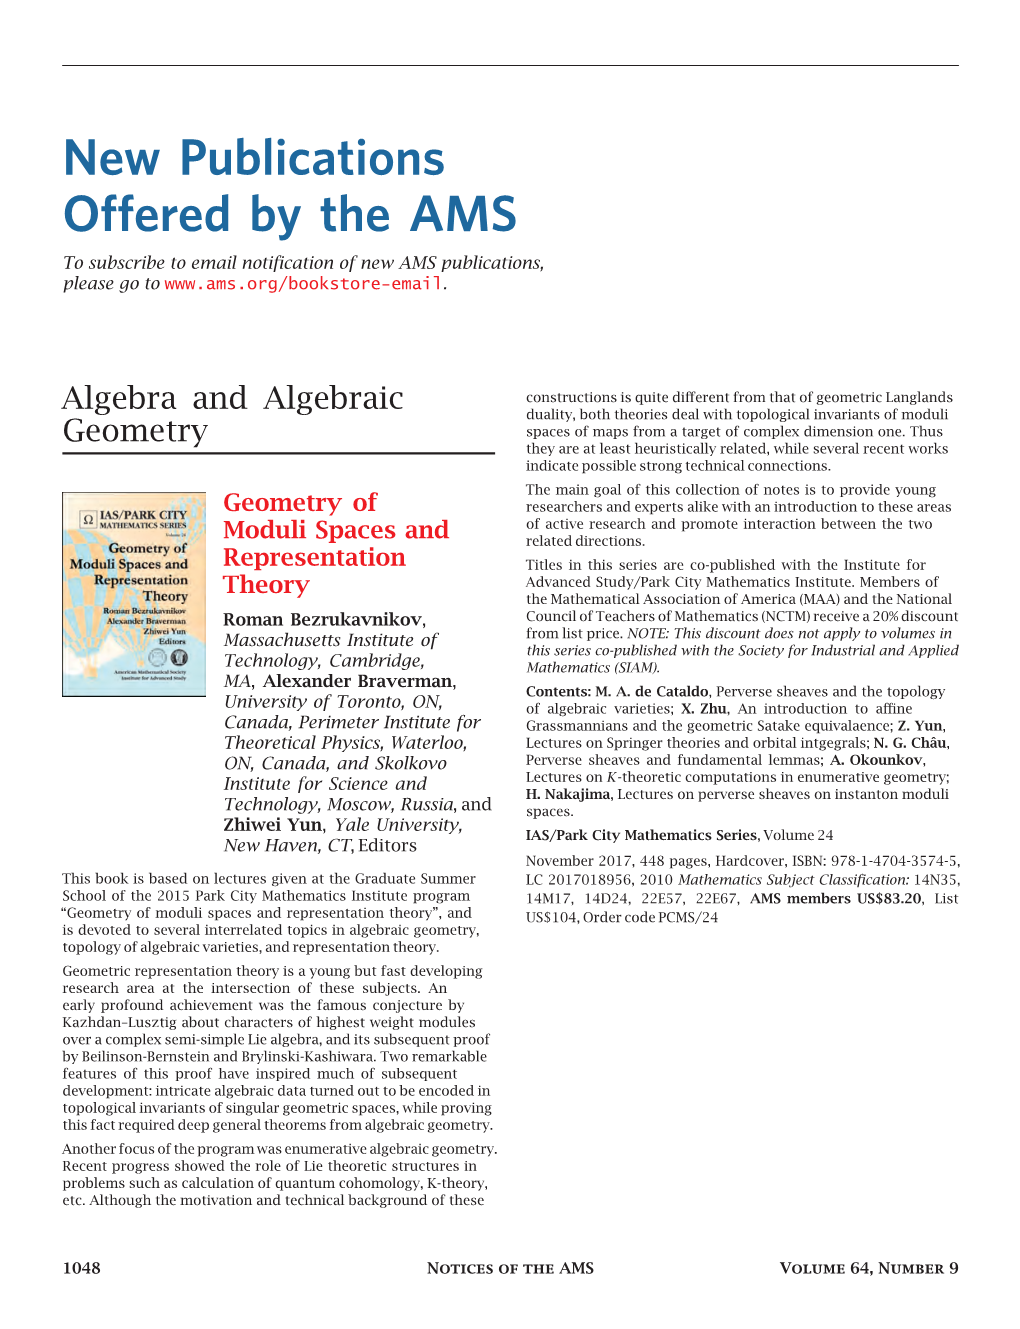 New Publications Offered by the AMS to Subscribe to Email Notiﬁcation of New AMS Publications, Please Go To